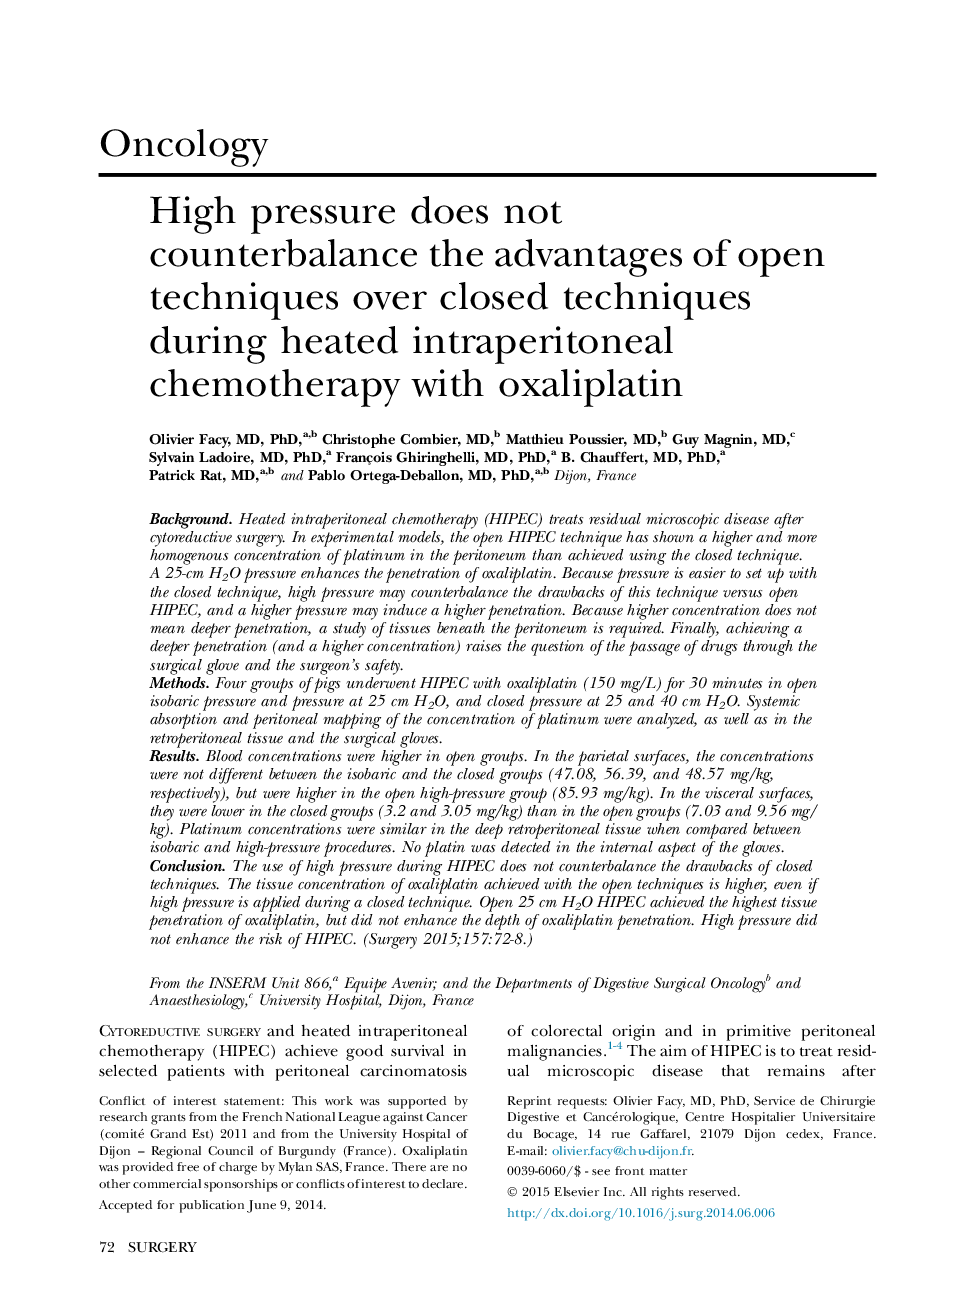 High pressure does not counterbalance the advantages of open techniques over closed techniques during heated intraperitoneal chemotherapy with oxaliplatin 